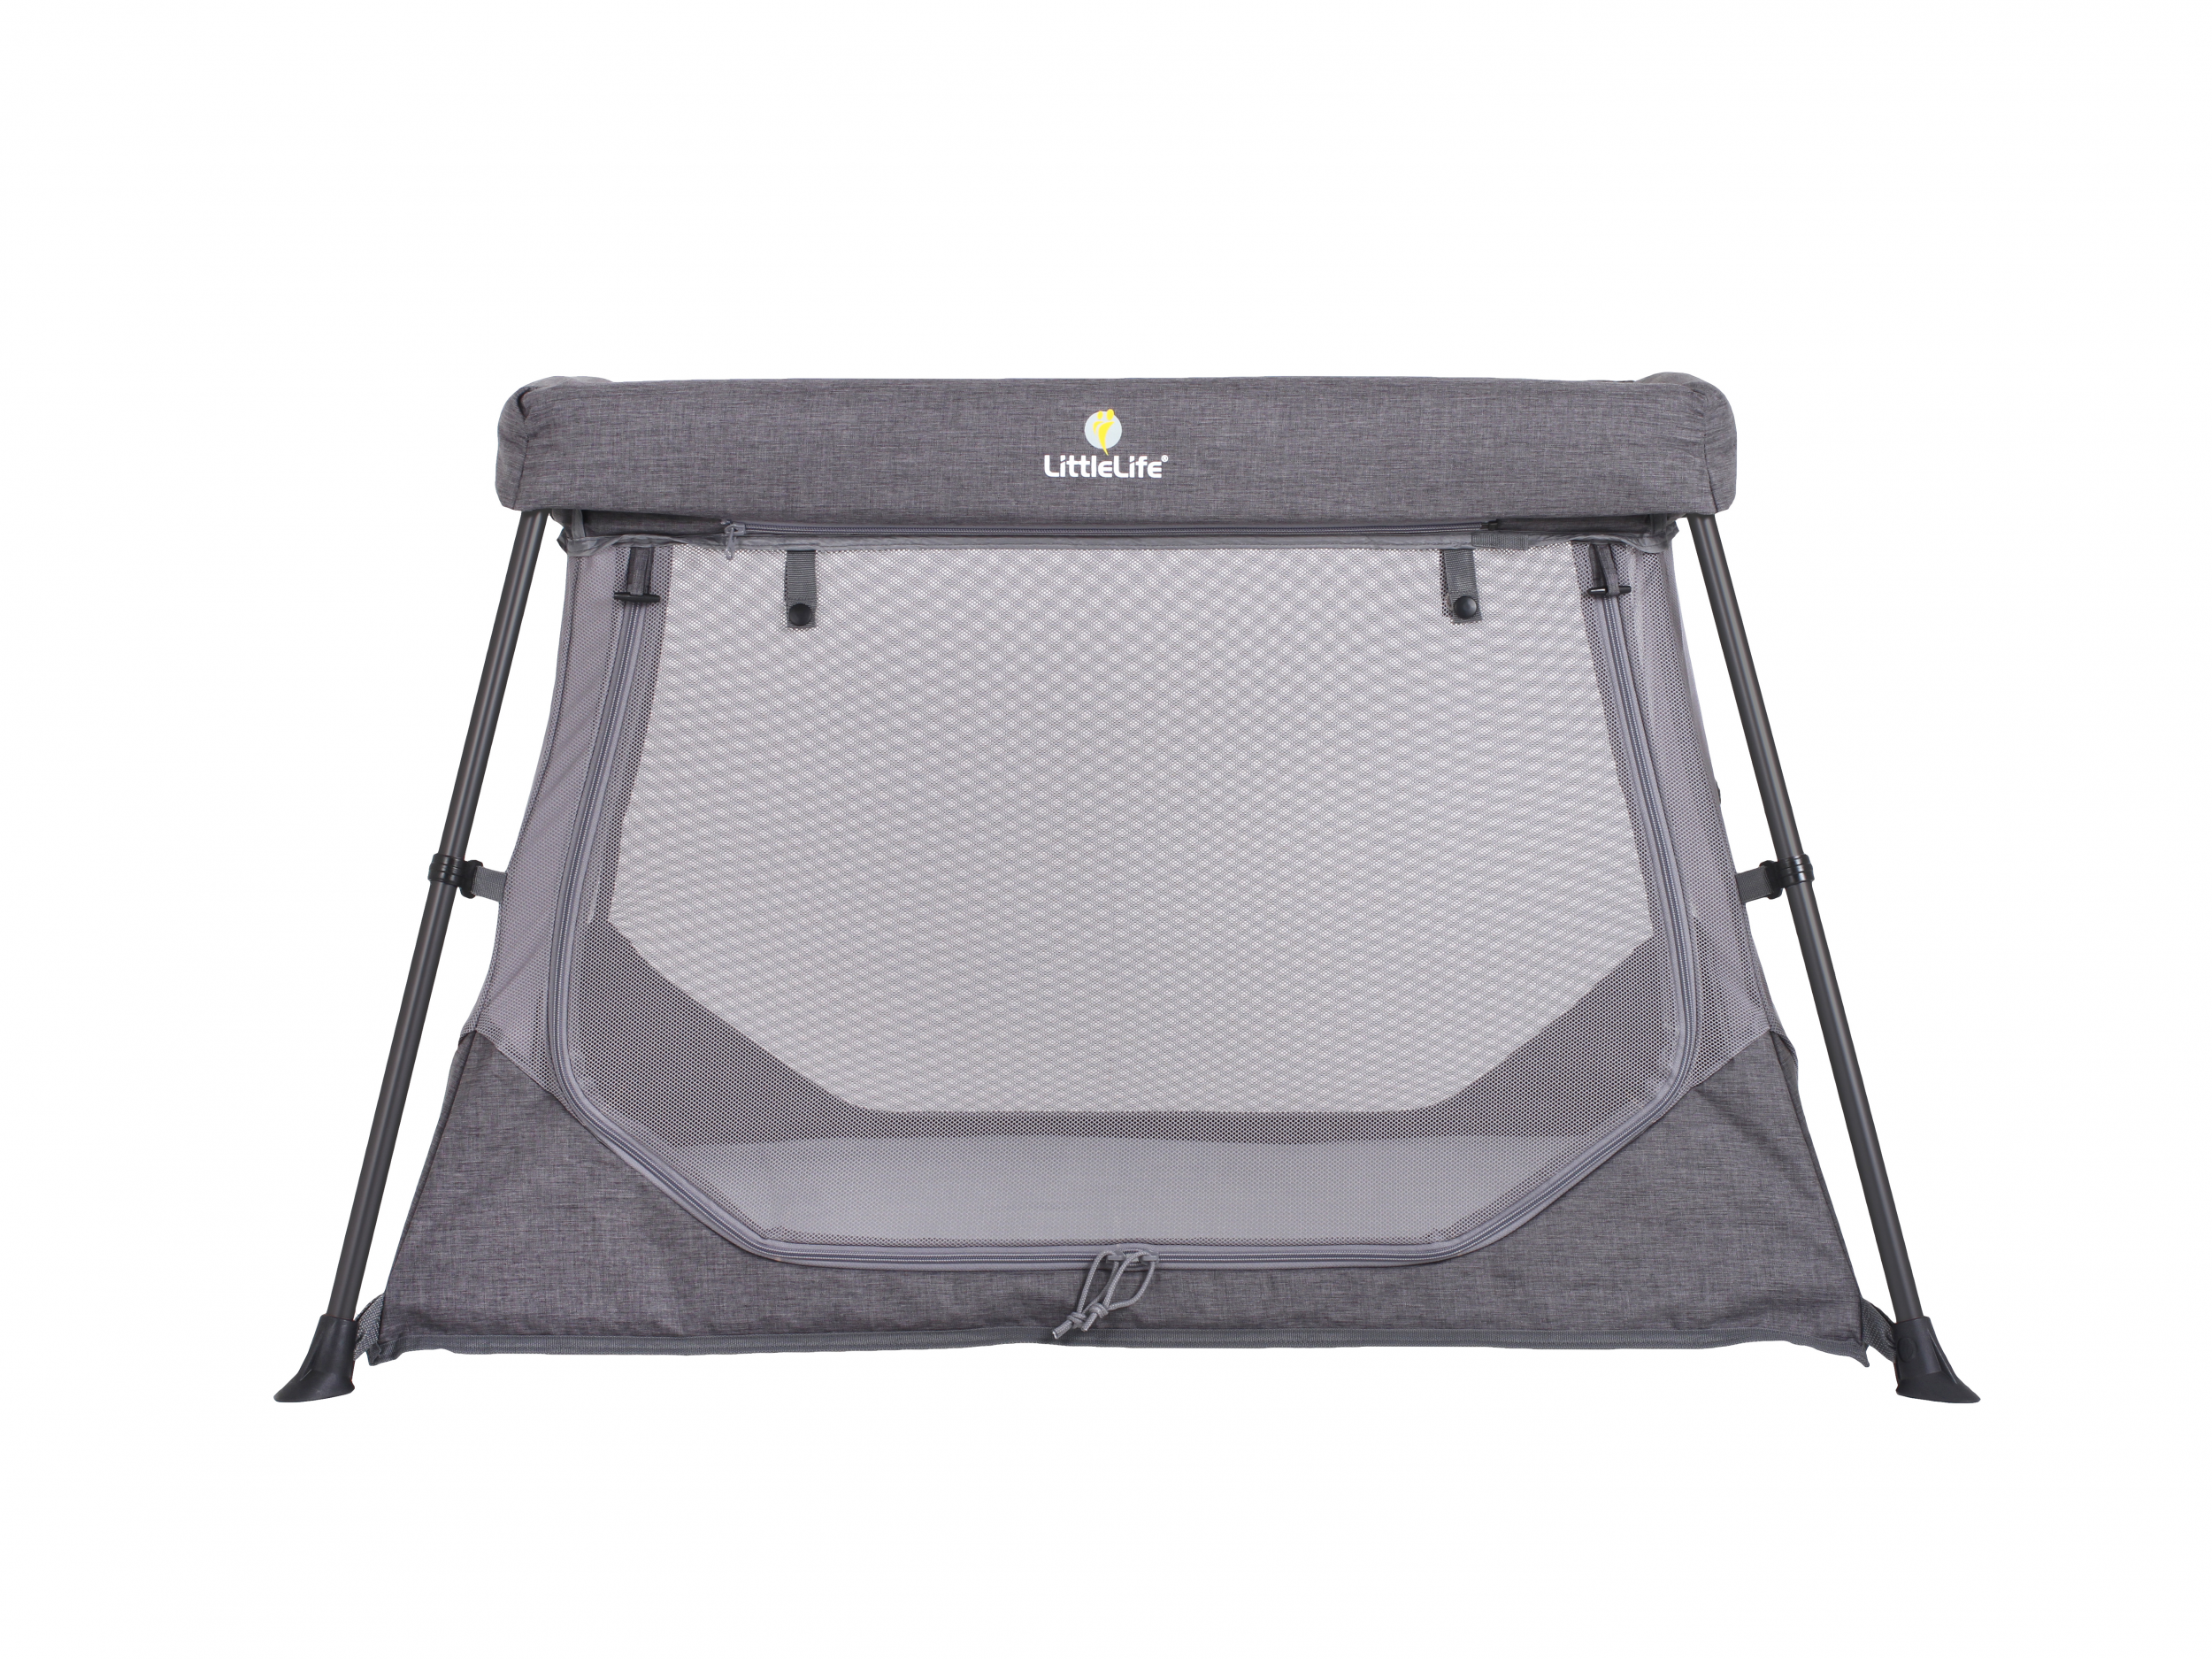 travel cot that fits in suitcase